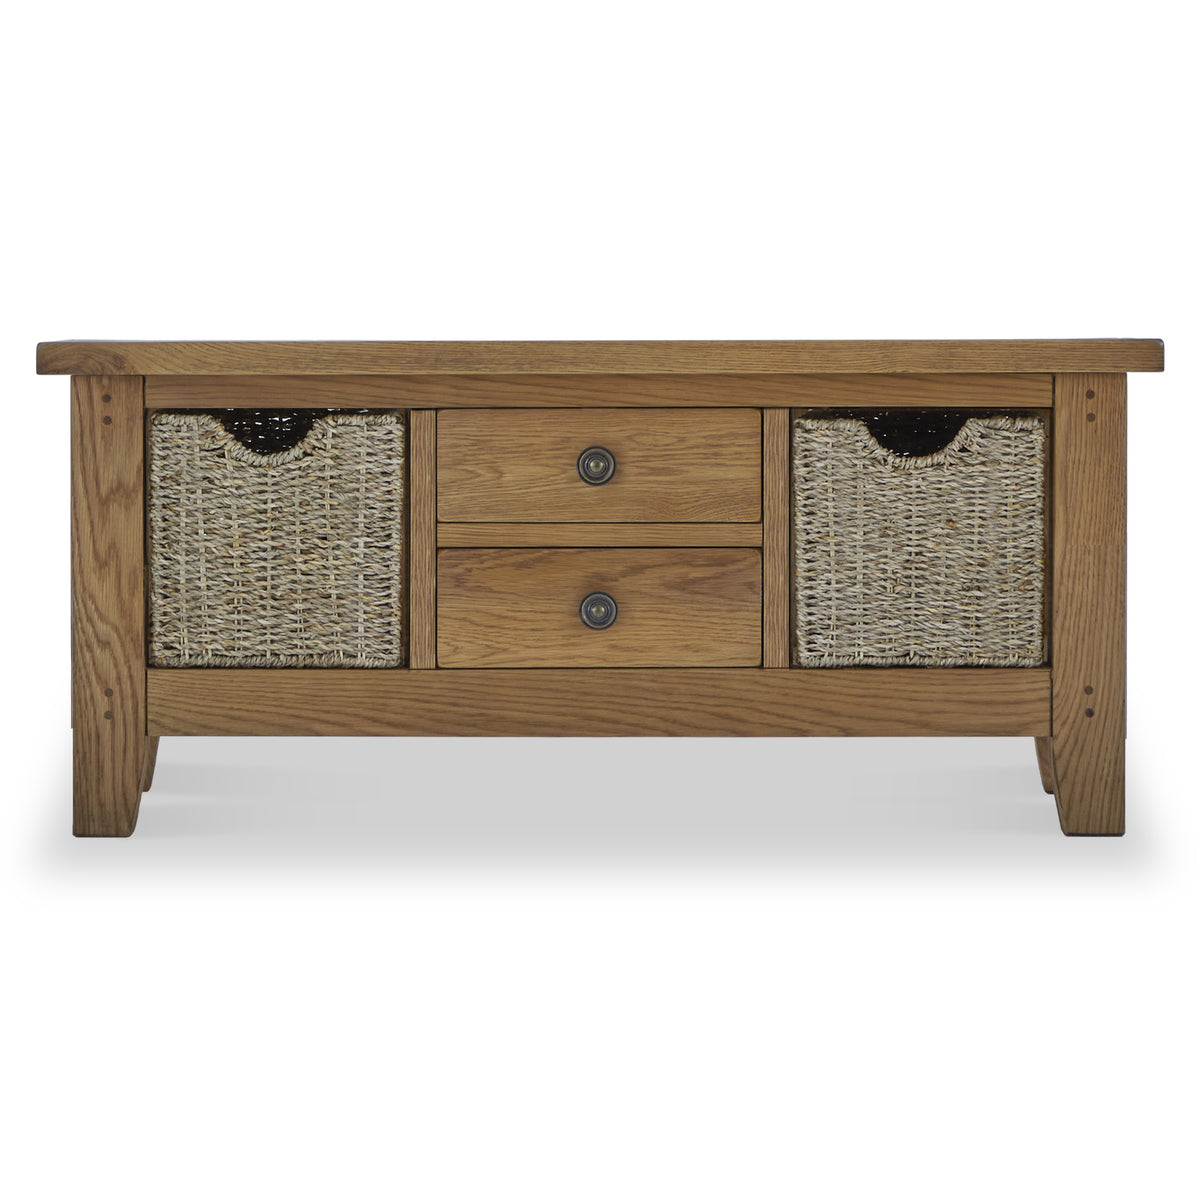 Broadway Oak Large Coffee Table with Baskets